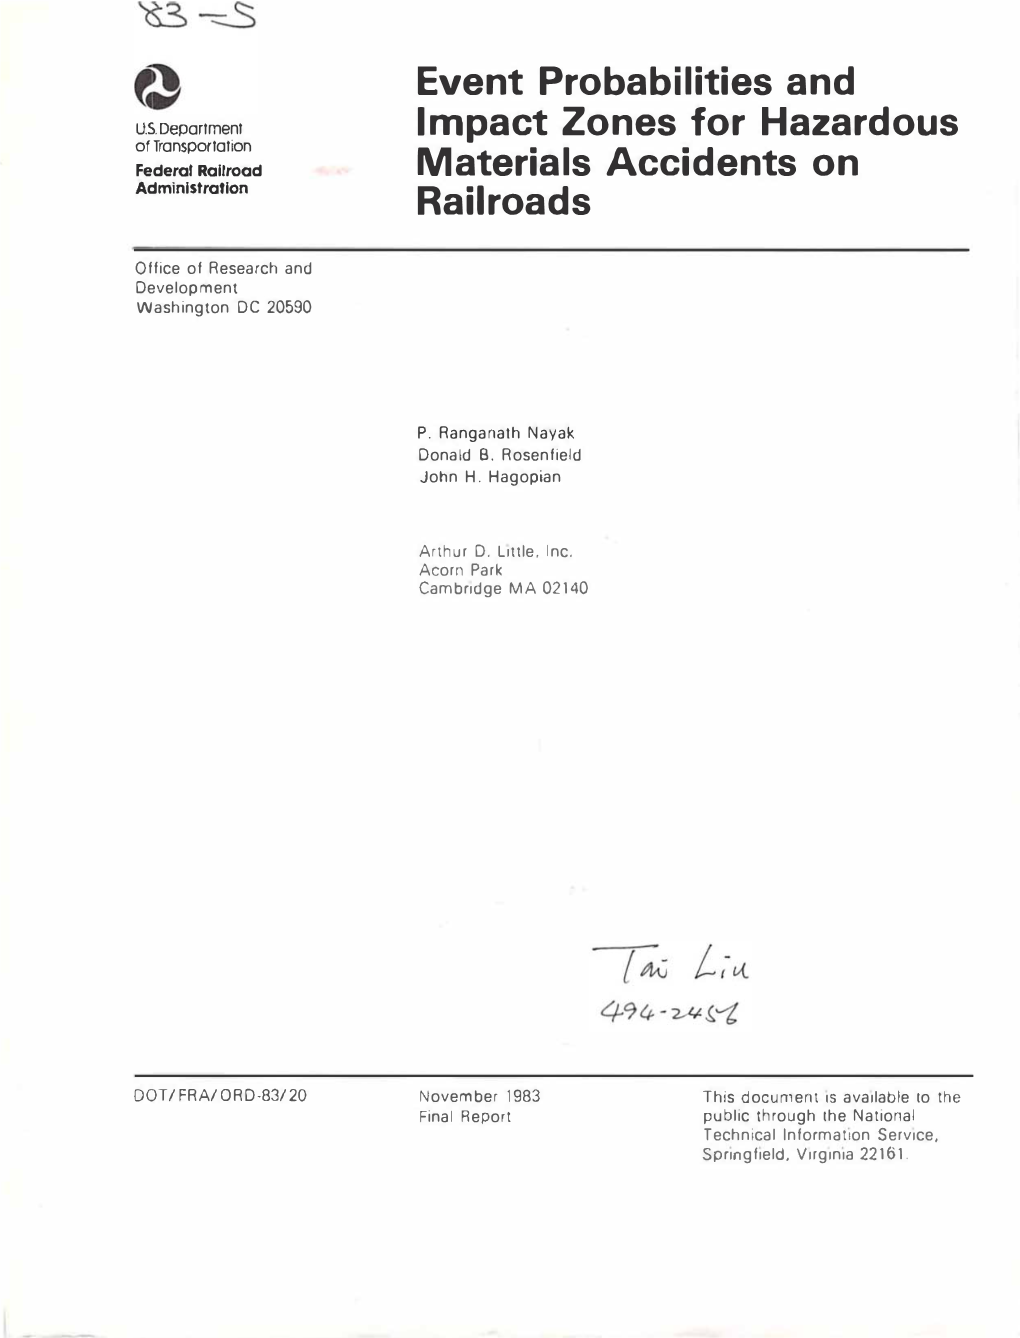 Event Probabilities and Impact Zones for Hazardous Materials Accidents on Railroads